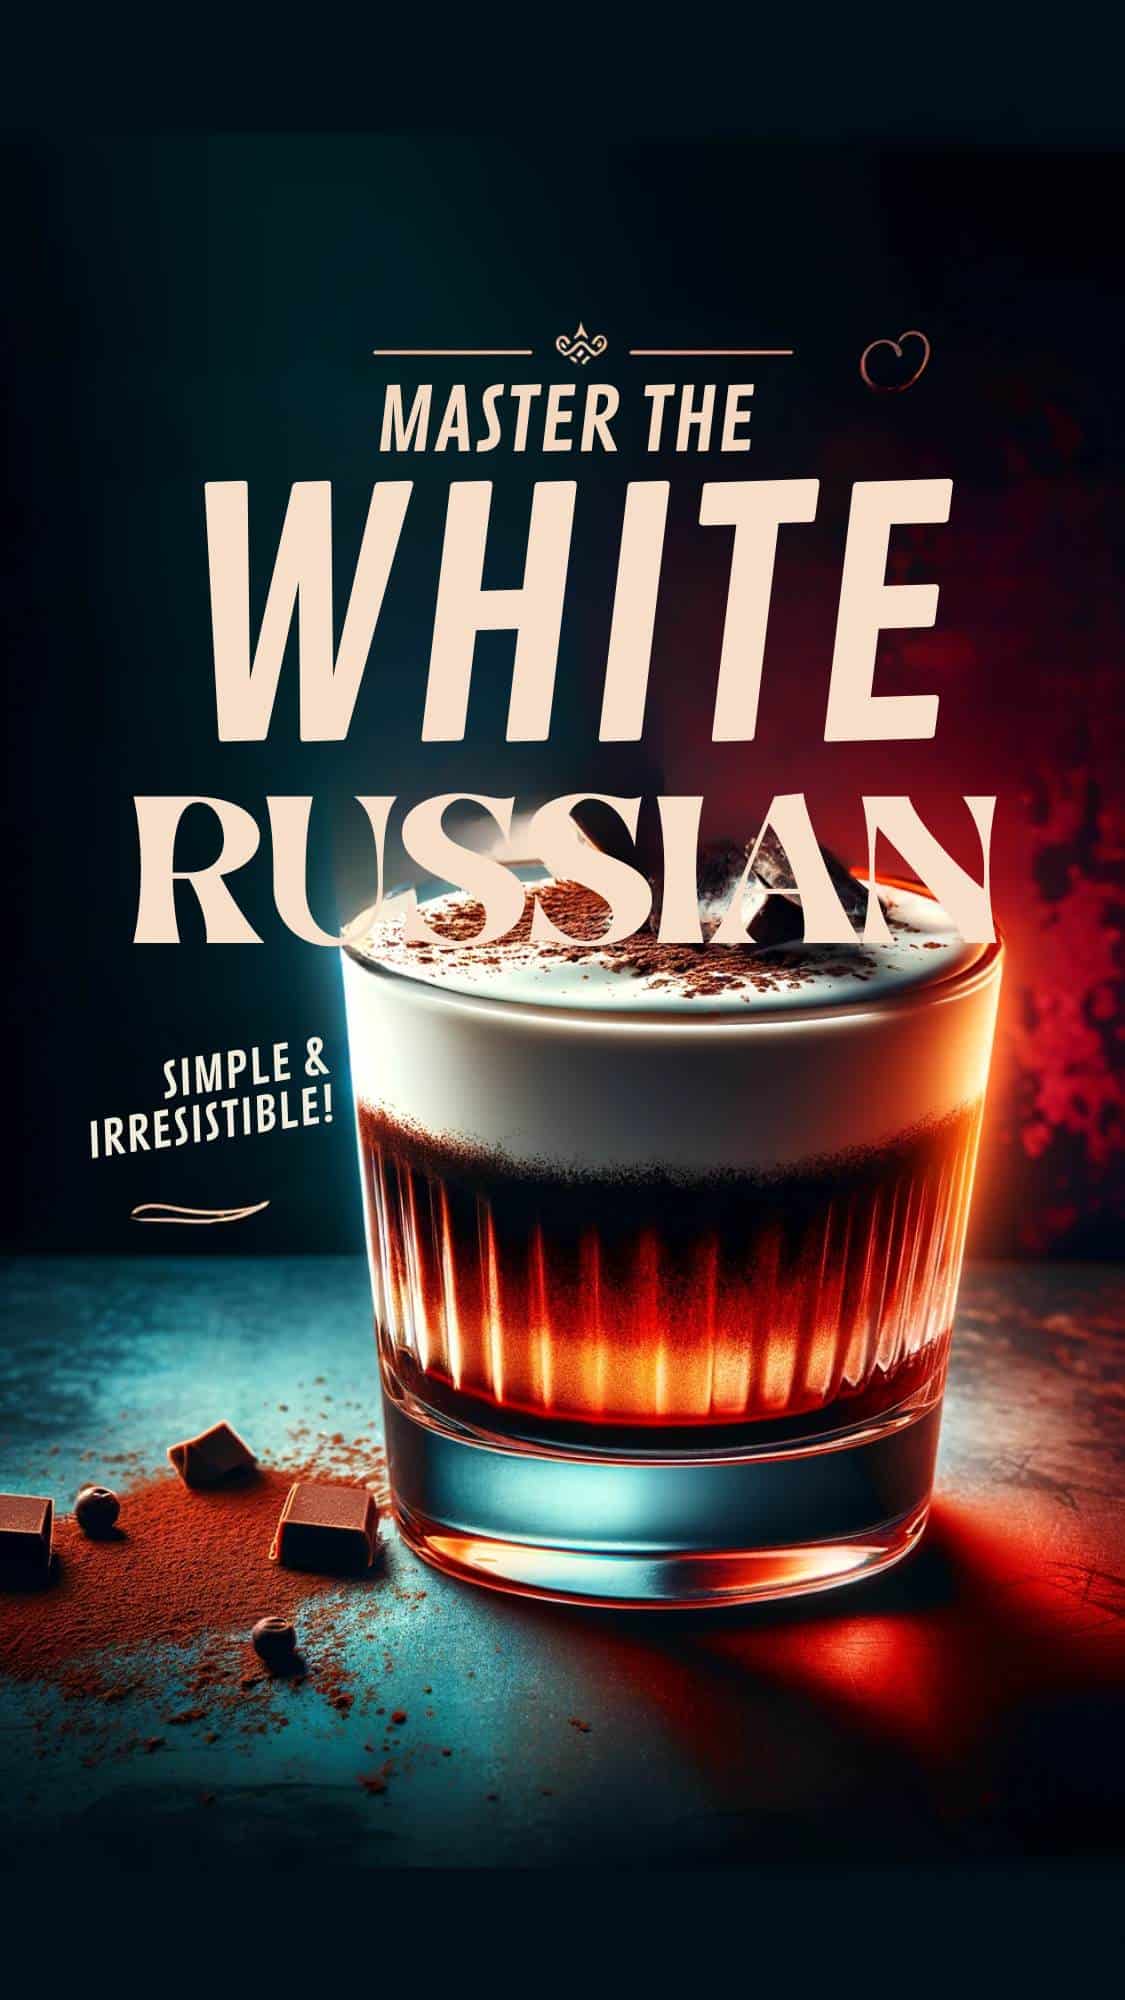 MASTER THE WHITE RUSSIAN